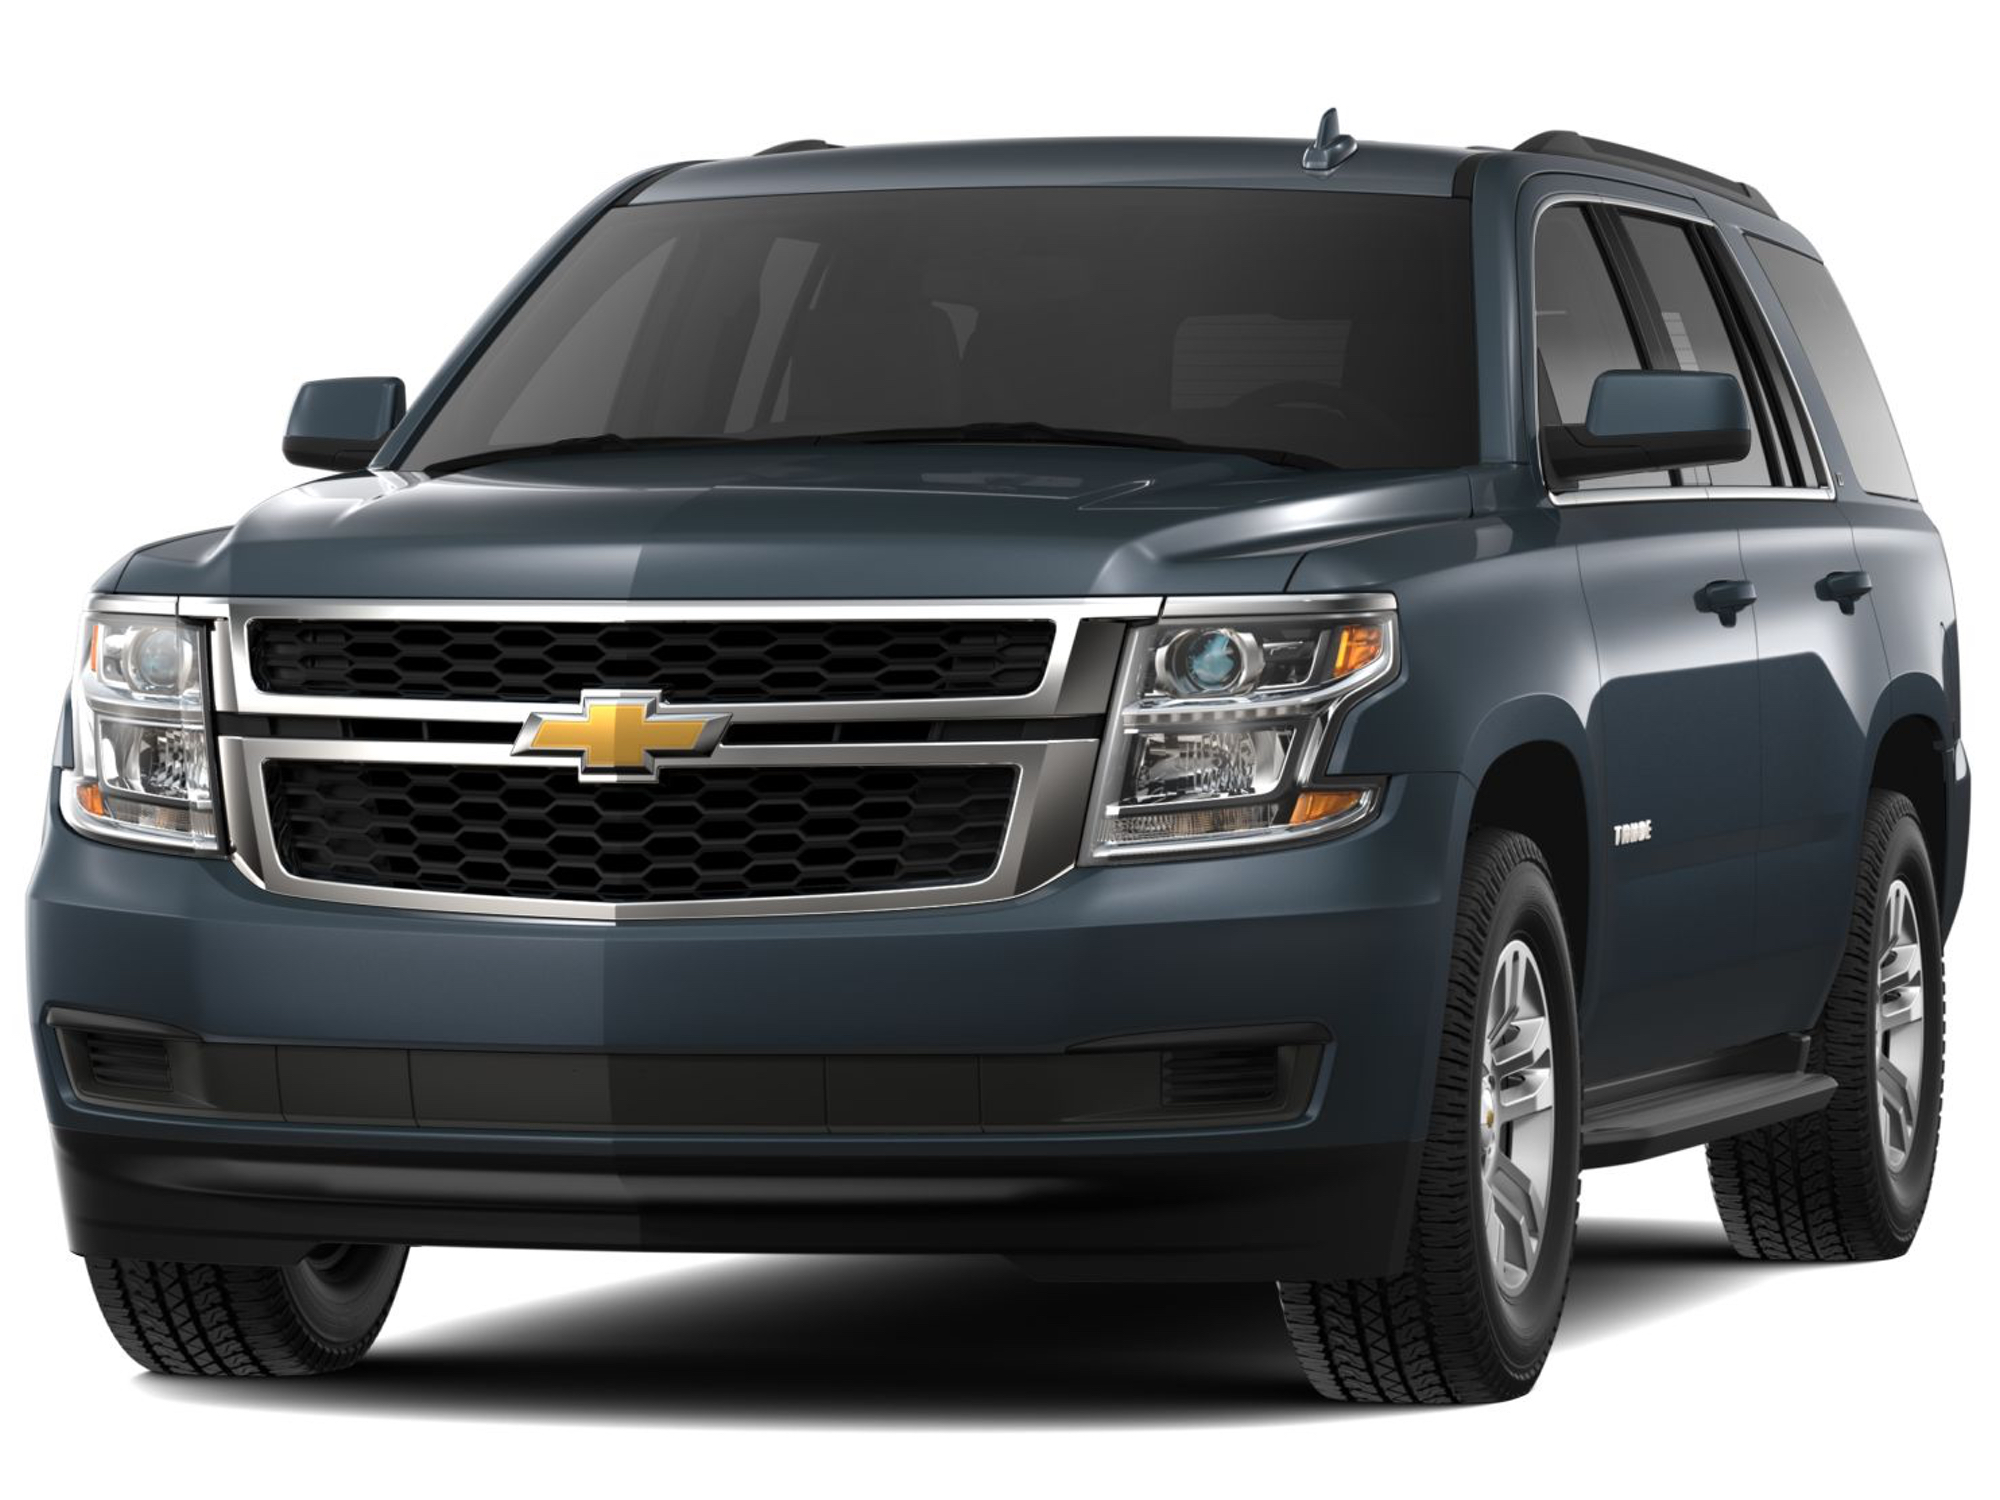 New Shadow Gray Metallic Color For The 2019 Chevy Tahoe: First Look